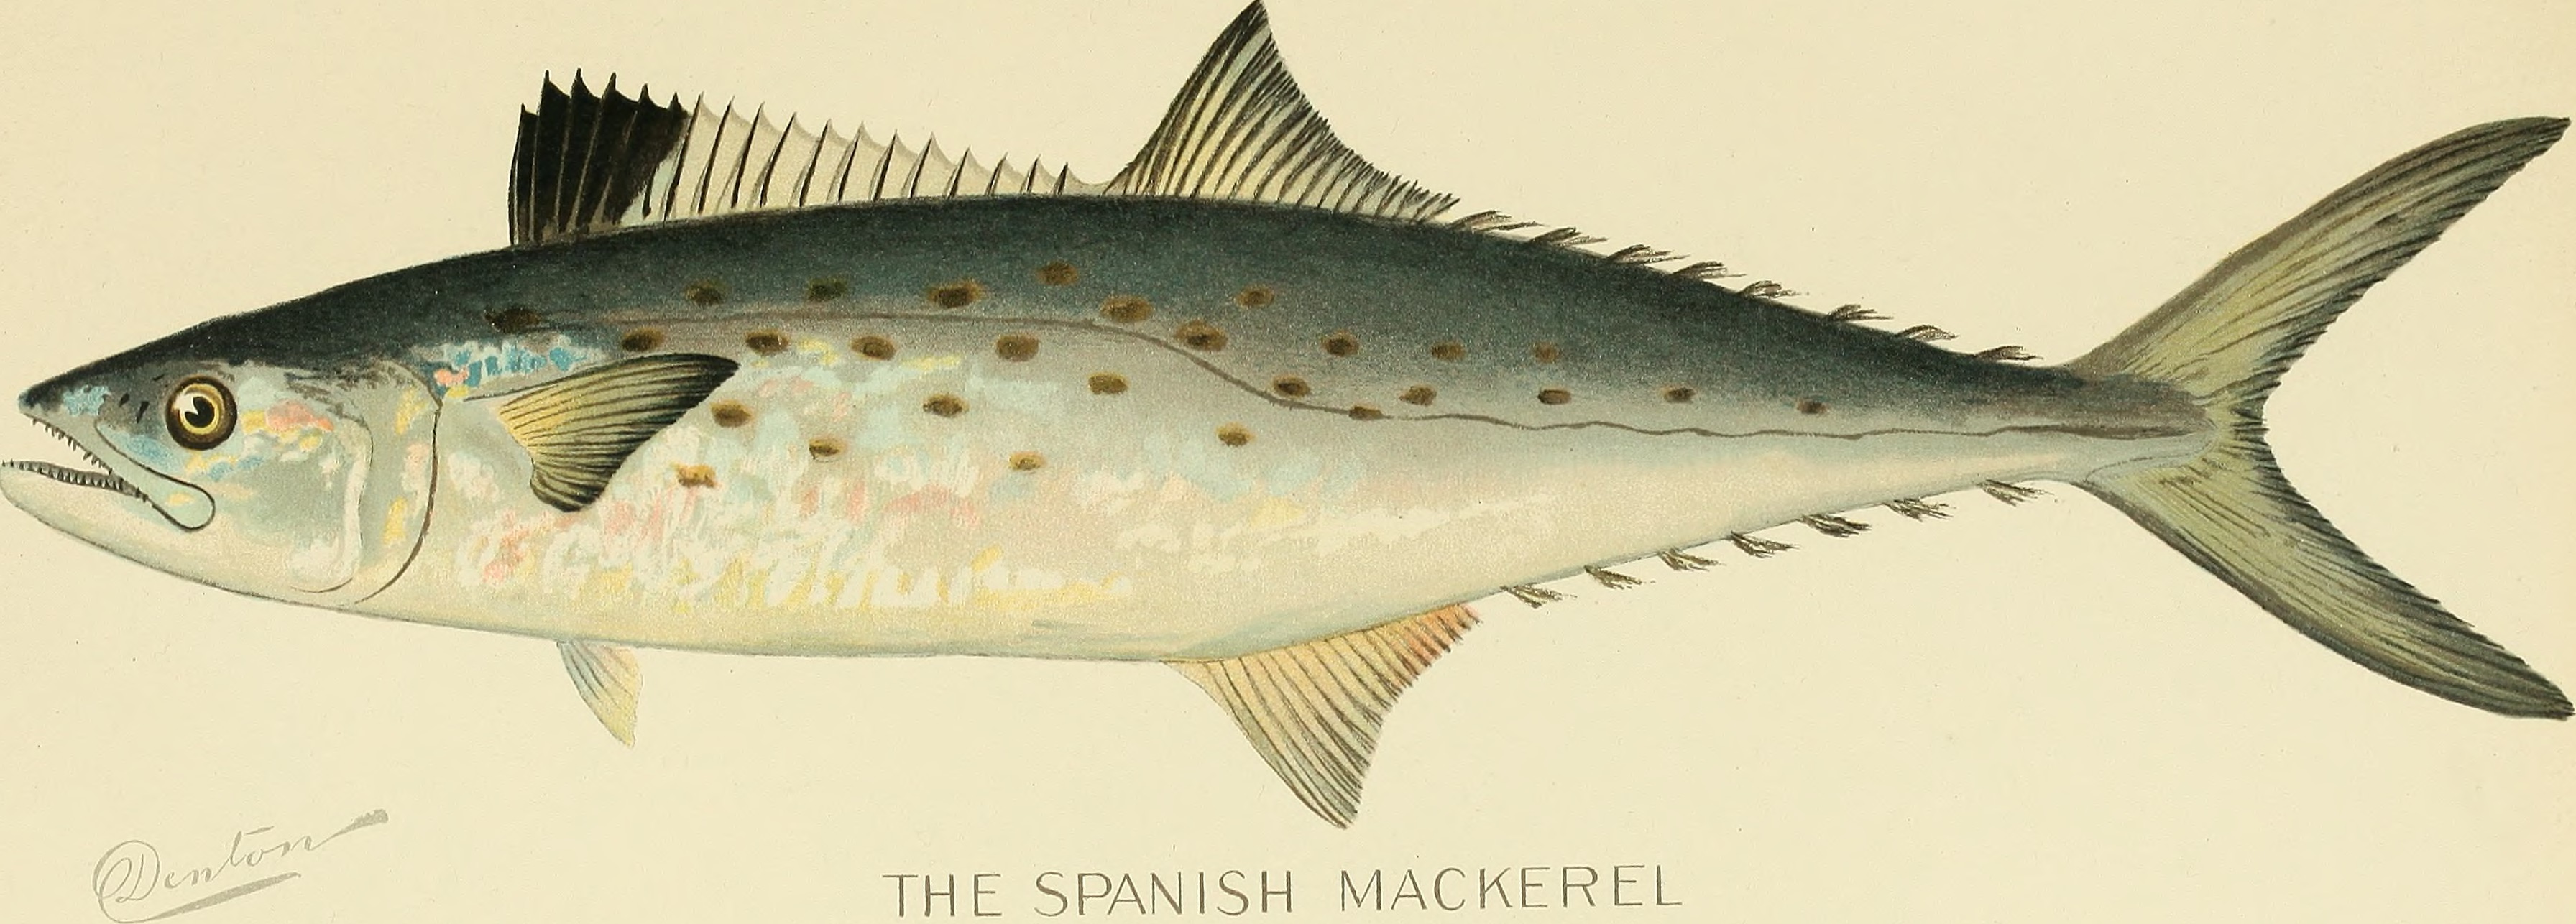 Annual report of the Commissioners of Fisheries, Game and Forests of the State of New York (1898) (18428842562)